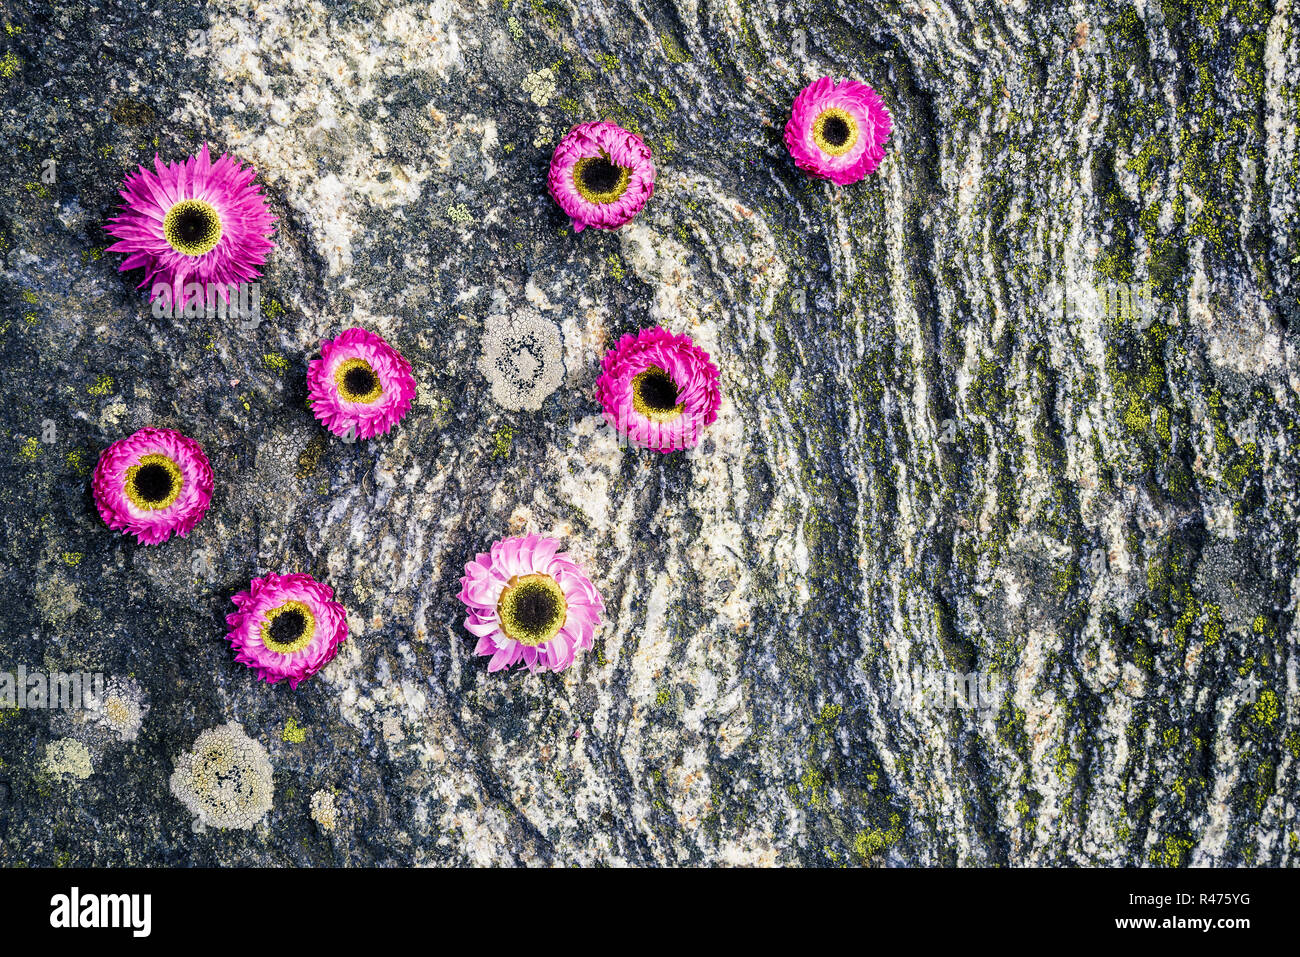 Vibrant pink strawflowers on mossy rock background. Scandinavian nature in summer. Stock Photo